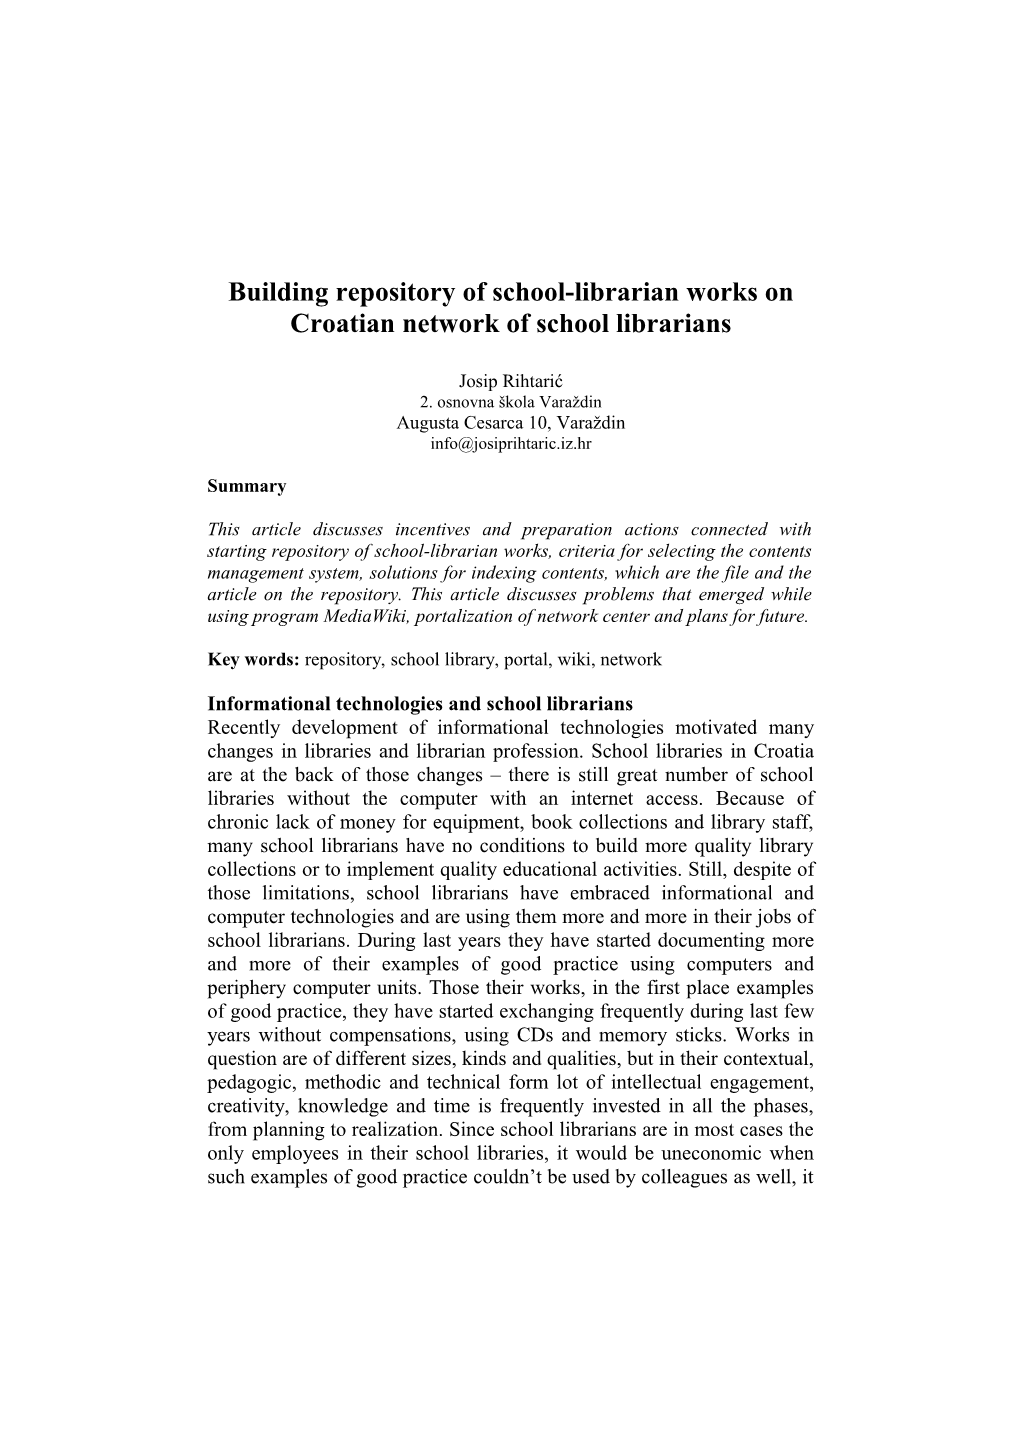 Building Repository of School-Librarian Works on Croatian Network of School Librarians